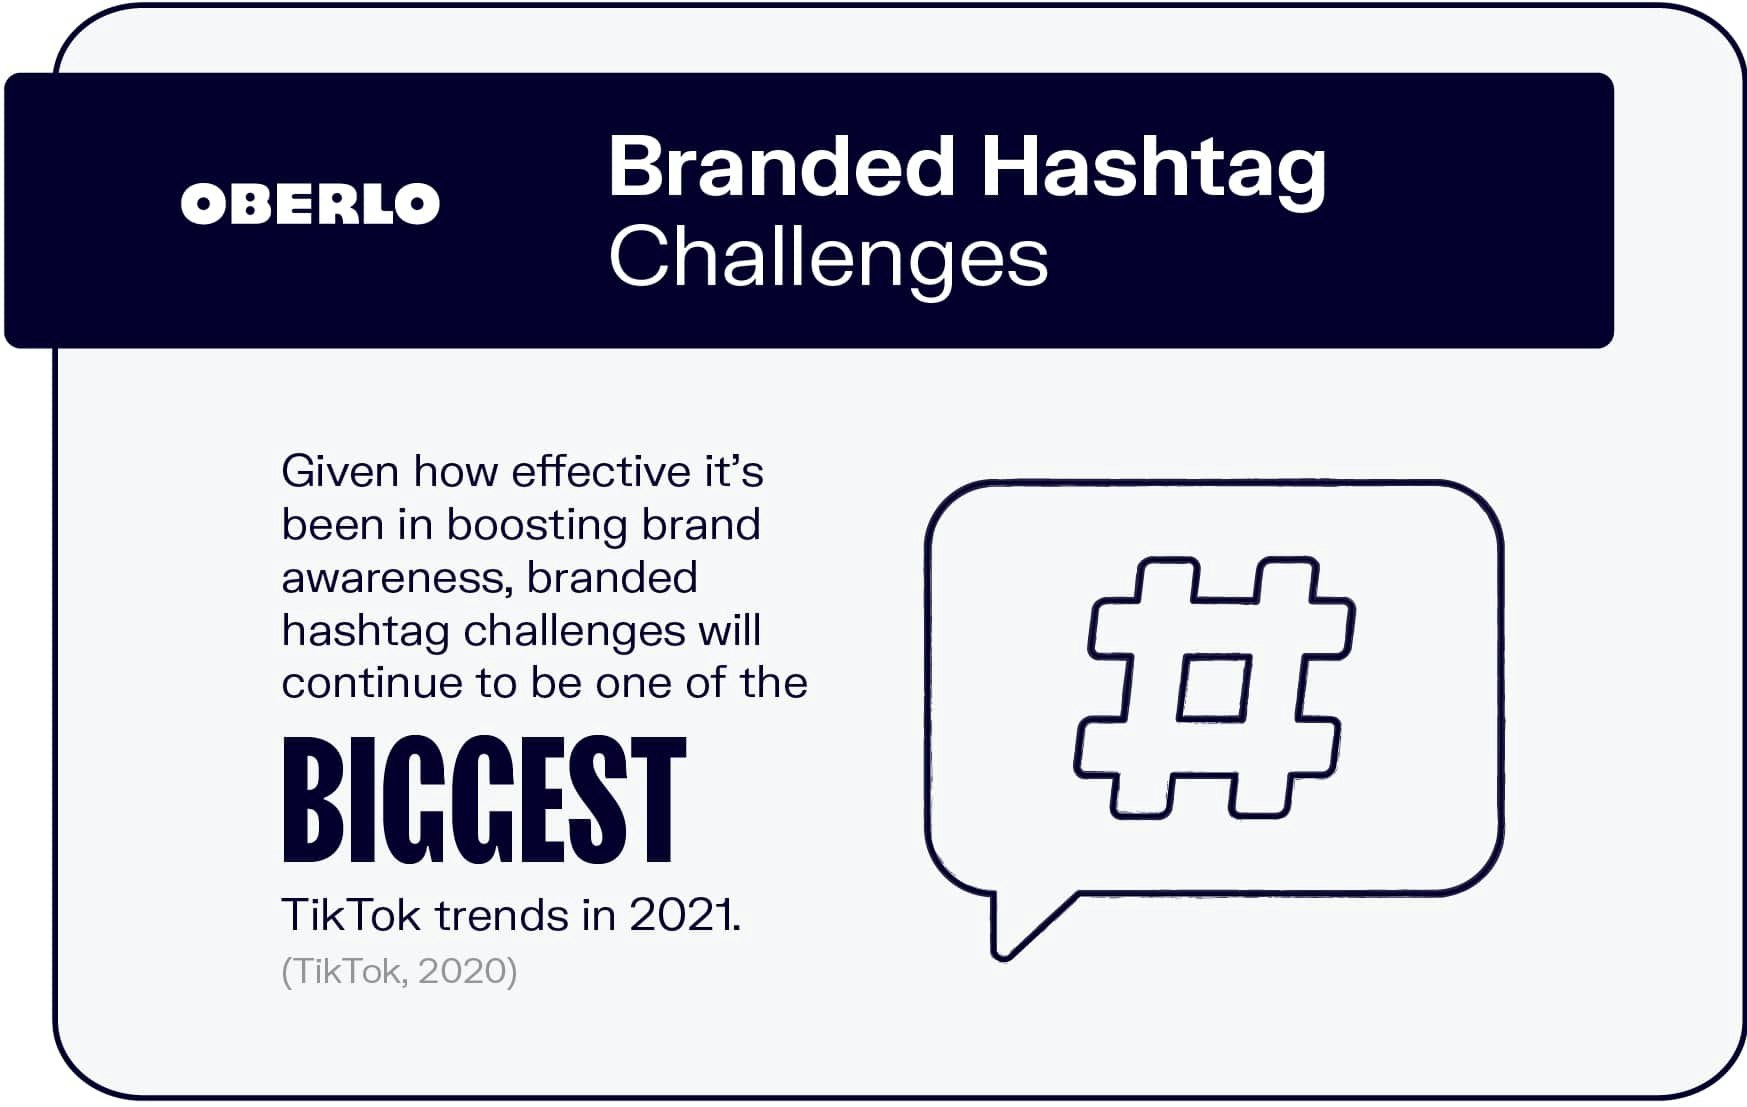 Branded Hashtag Challenges